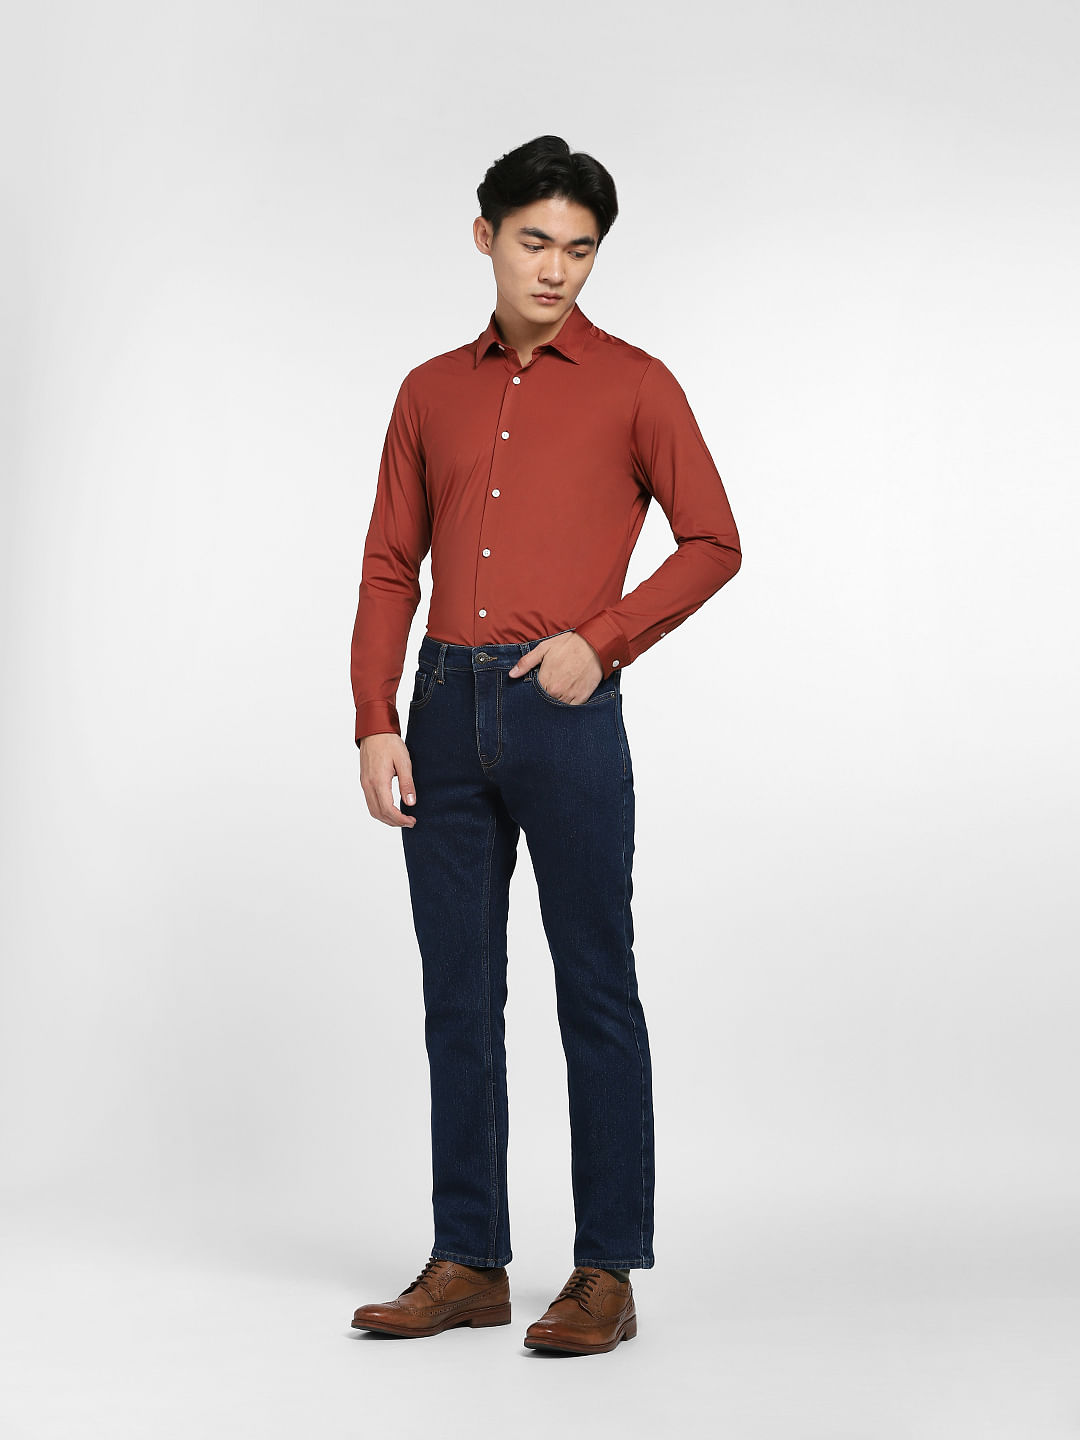 Red Dress Shirt with Beige Pants Outfits For Men (5 ideas & outfits) |  Lookastic